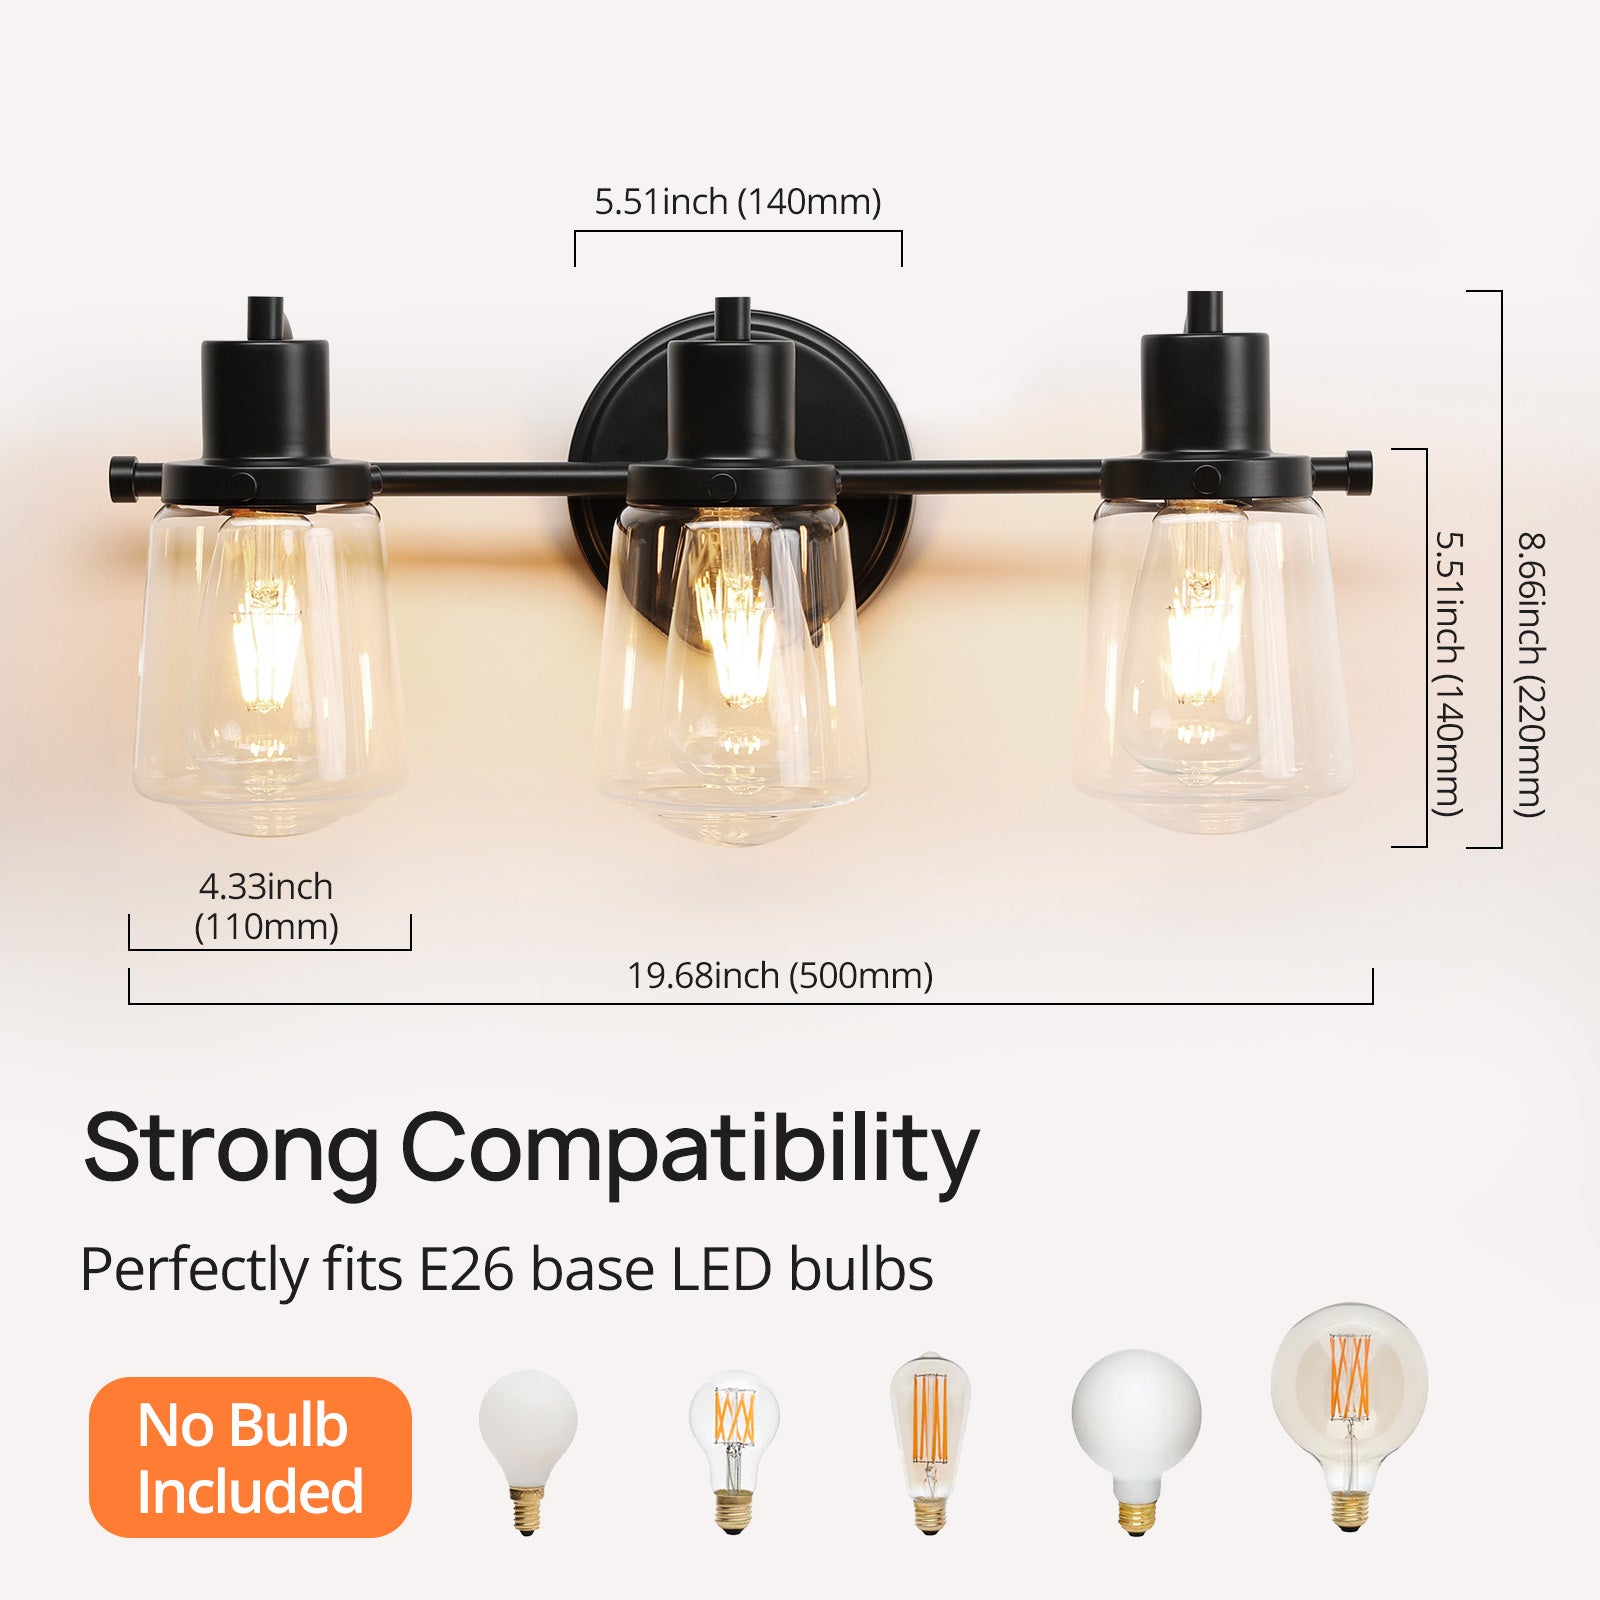 4-Light Bathroom Light Fixtures,Vanity Light, Bathroom Lighting with Clear Glass Lampshade, Dimmable CL012